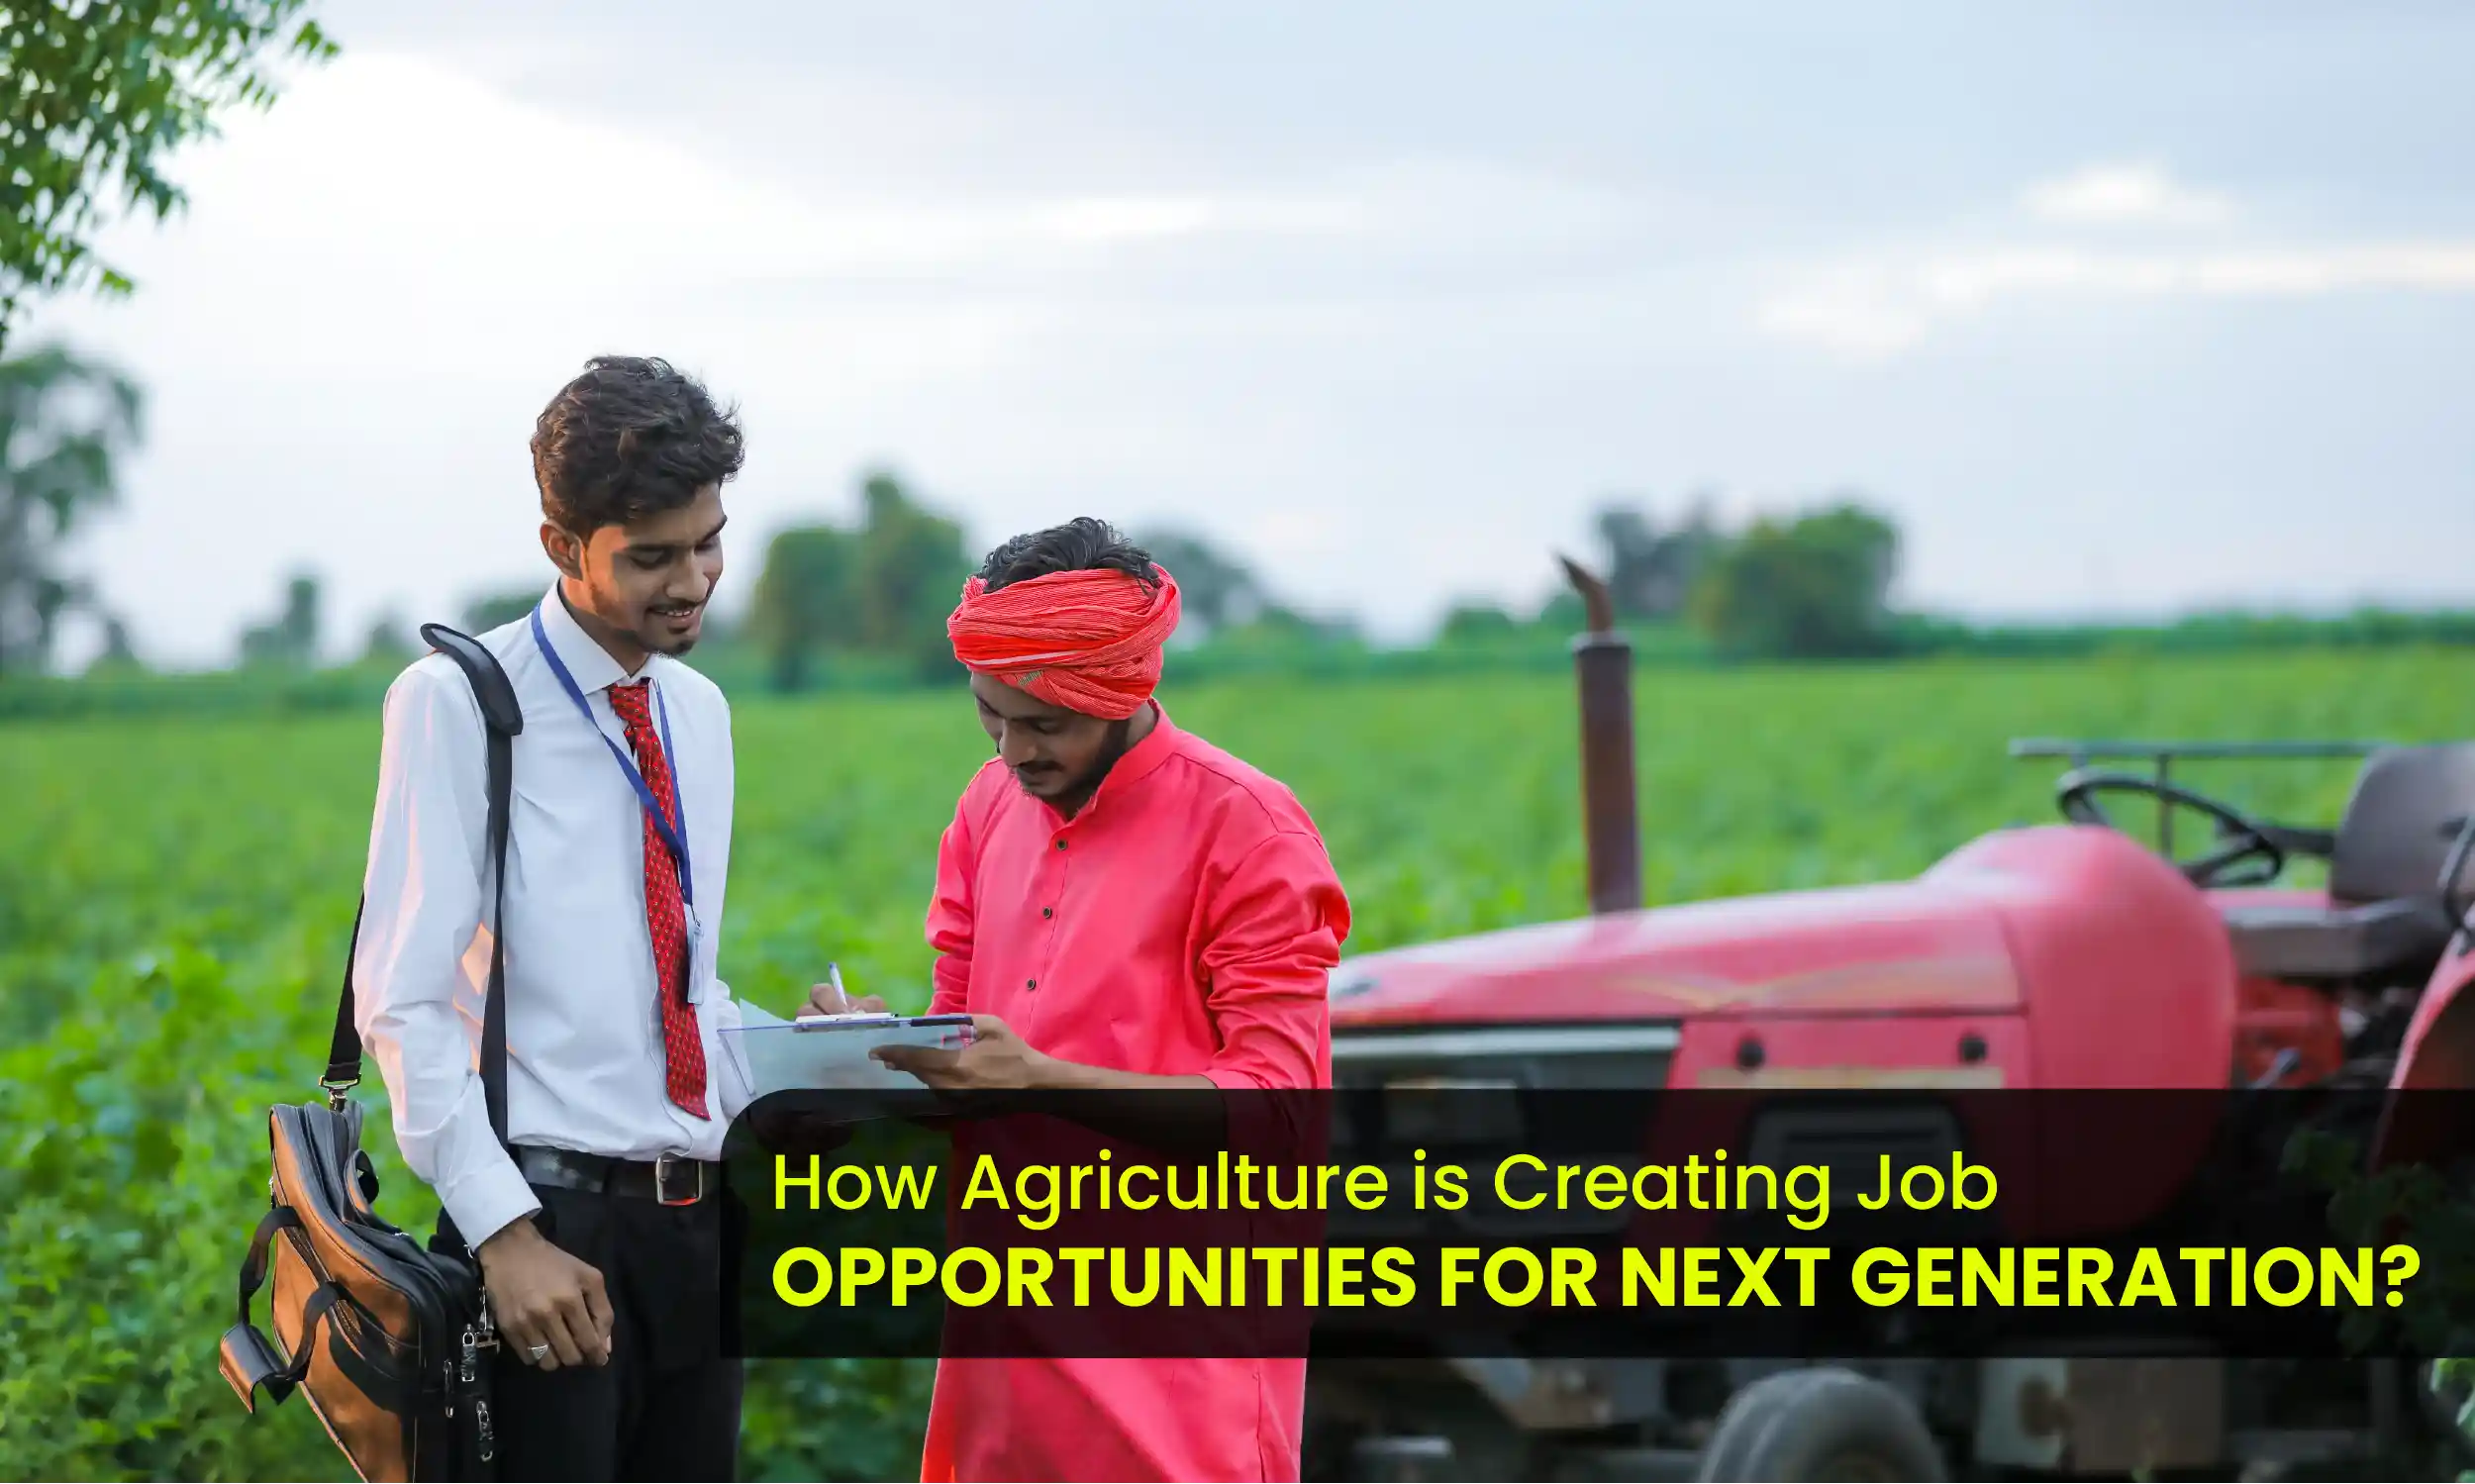 Modern agriculture is creating job opportunities for next generation